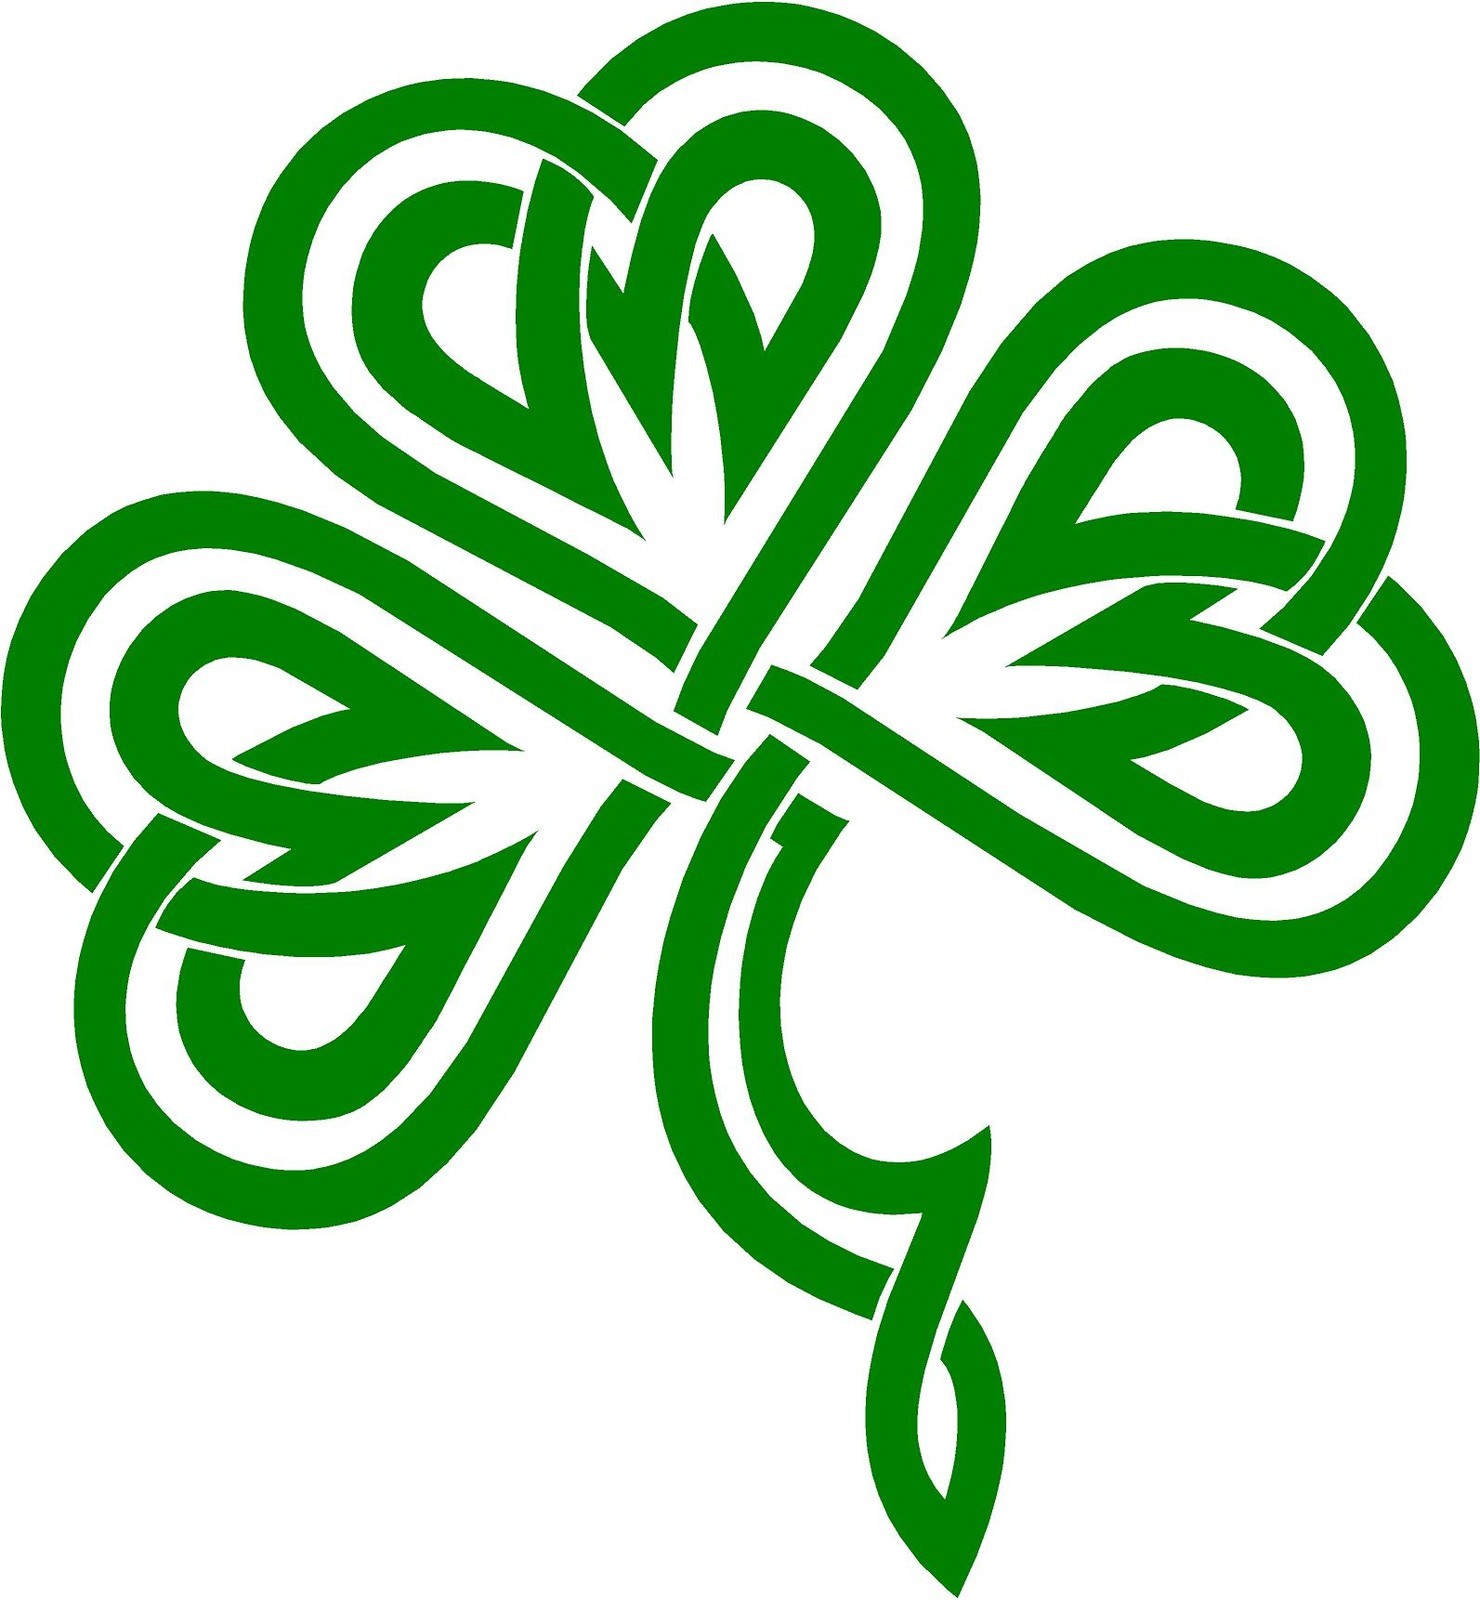 Oxalis Plants and Shamrock Traditions